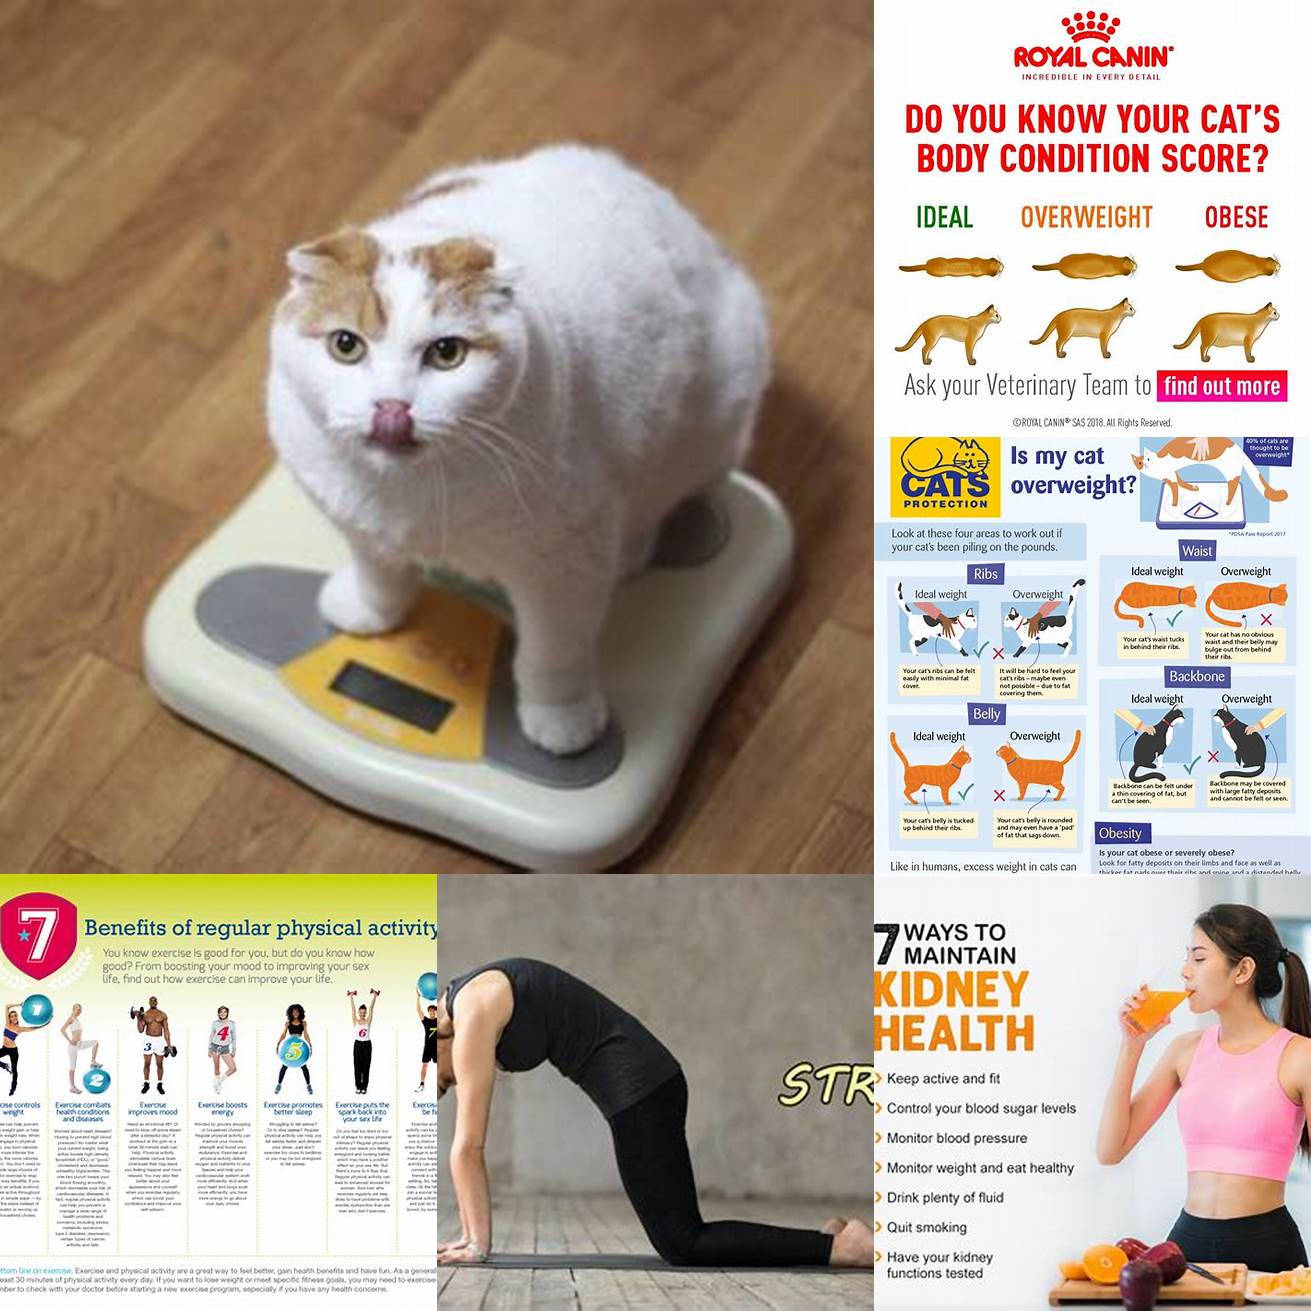 Exercise Regular exercise can help your cat maintain a healthy weight and prevent health issues